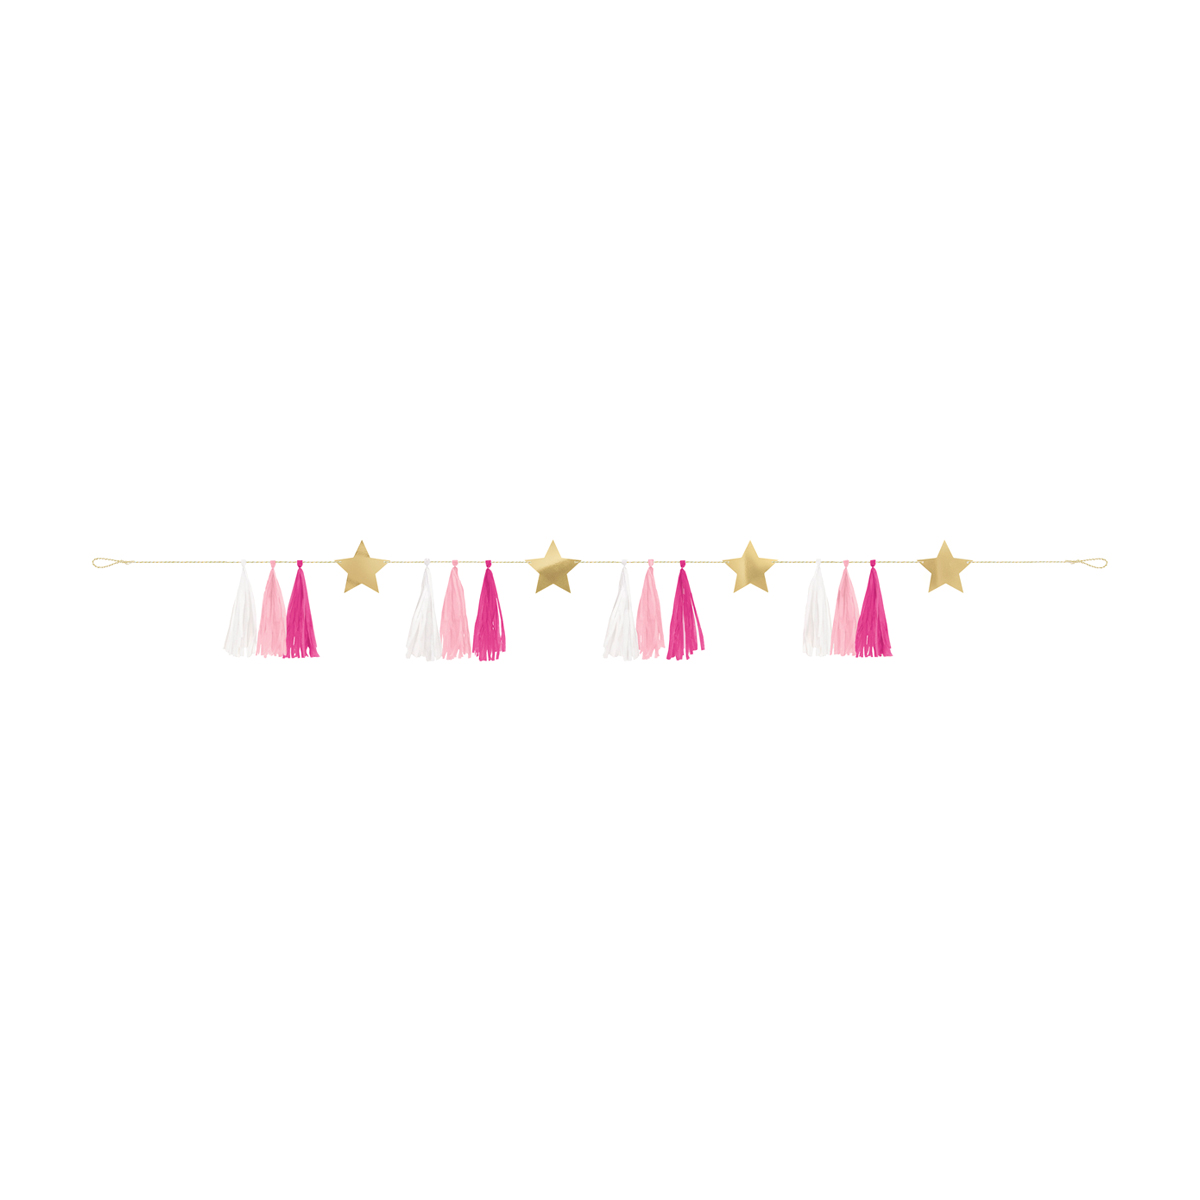 Foil Cutout Gold Star Garland with Tassels, 6 ft